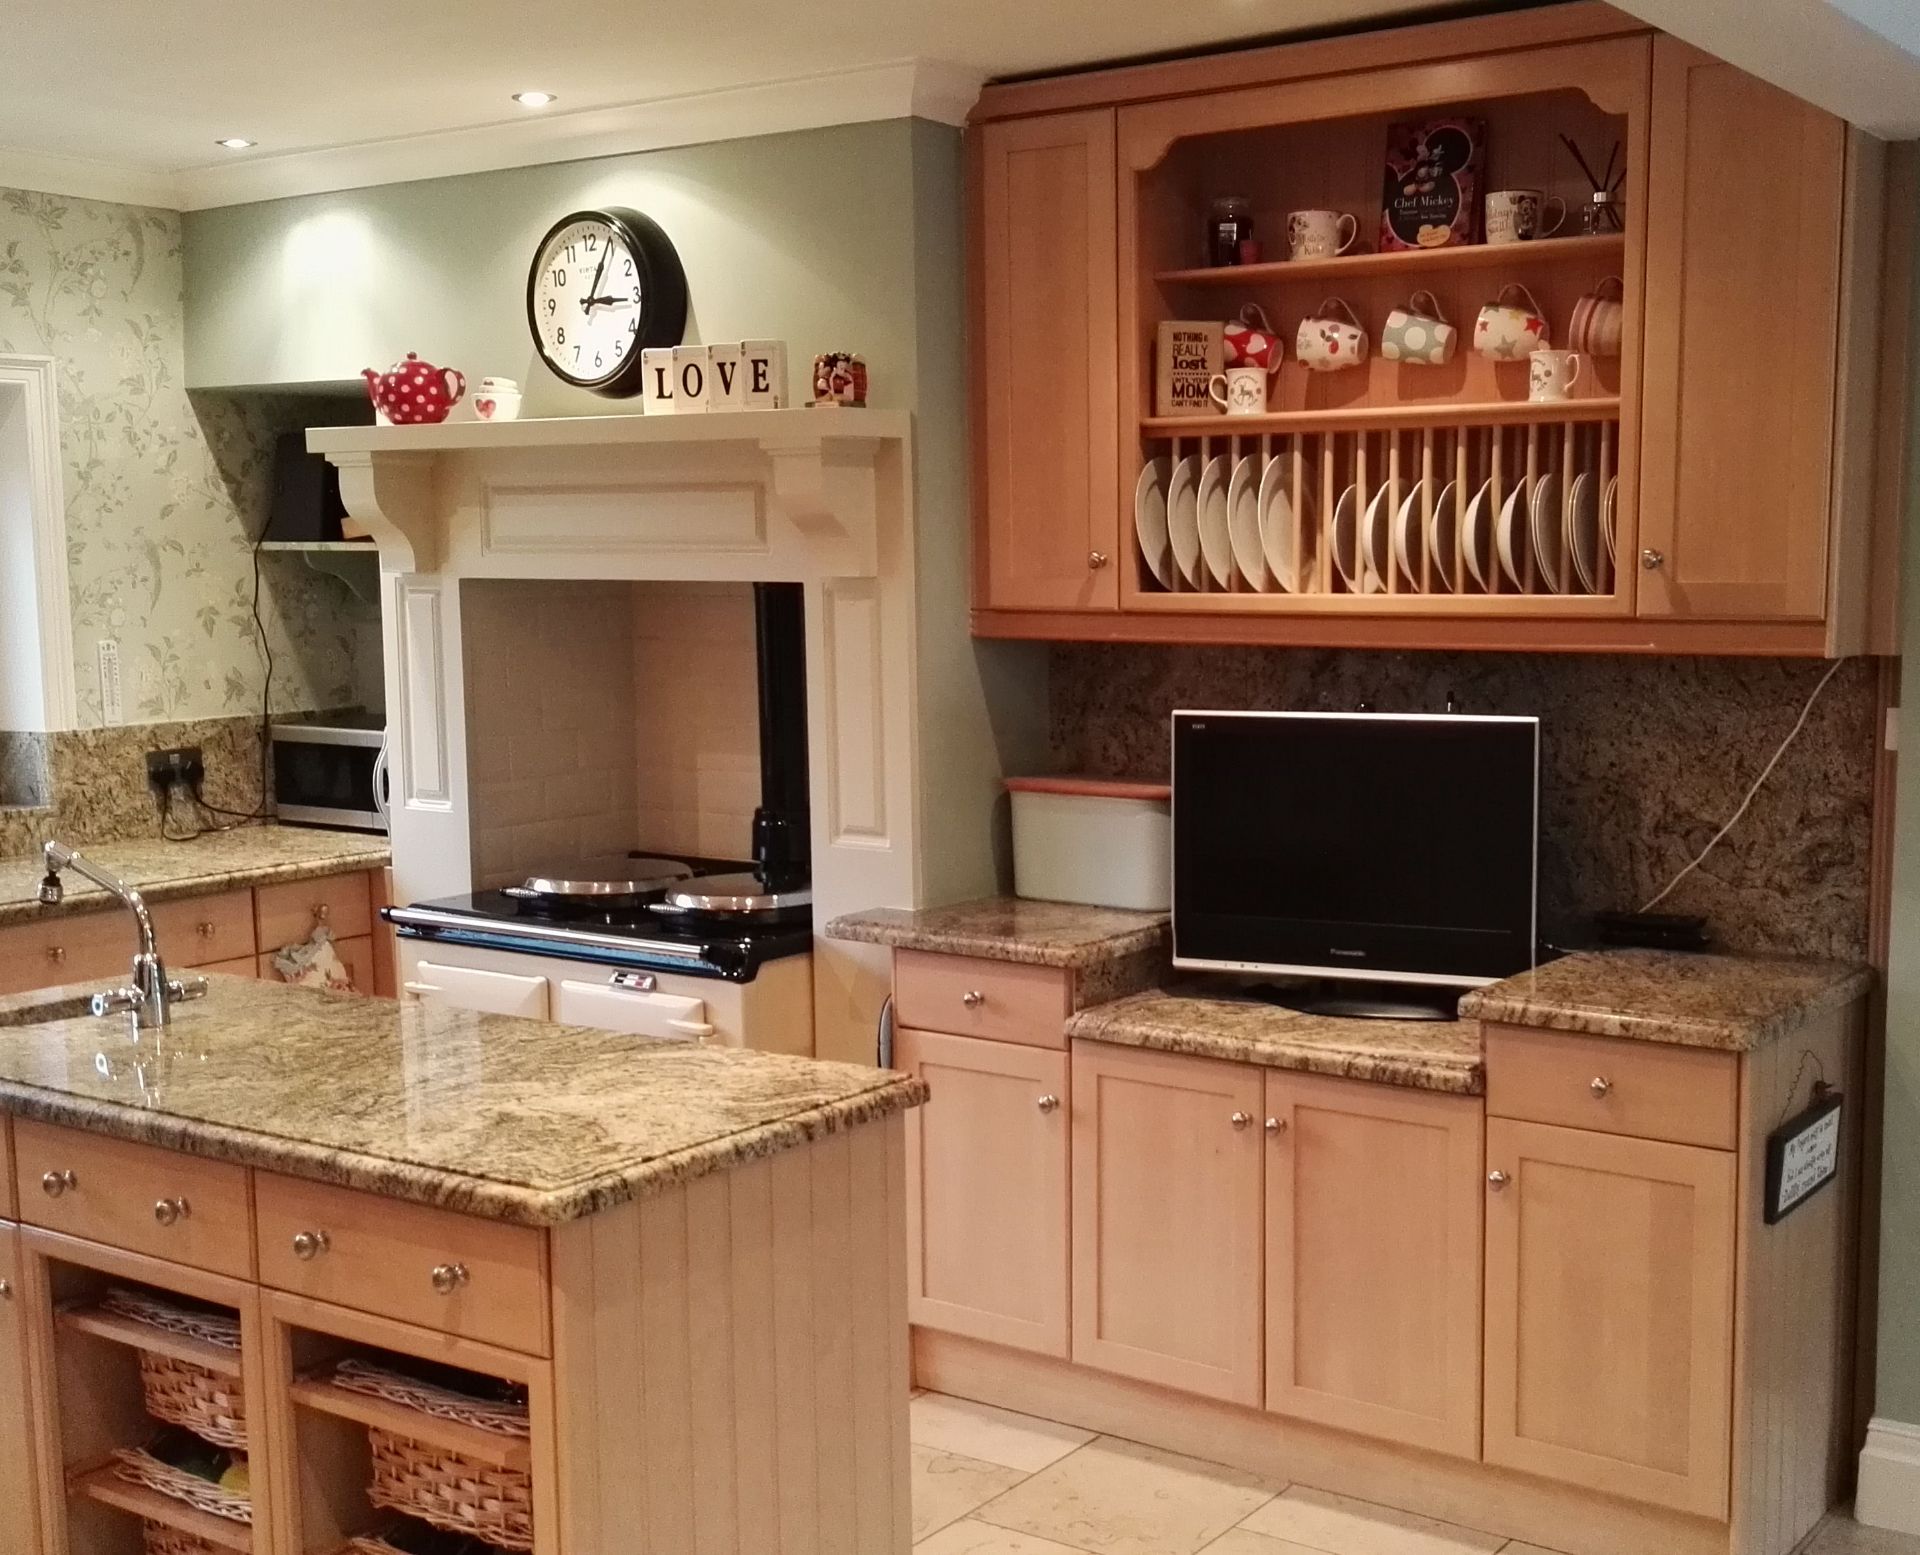 1 x Attractive Bespoke Fitted Kitchen with Granite Worktops and Integrated Appliances - CL - Image 6 of 26